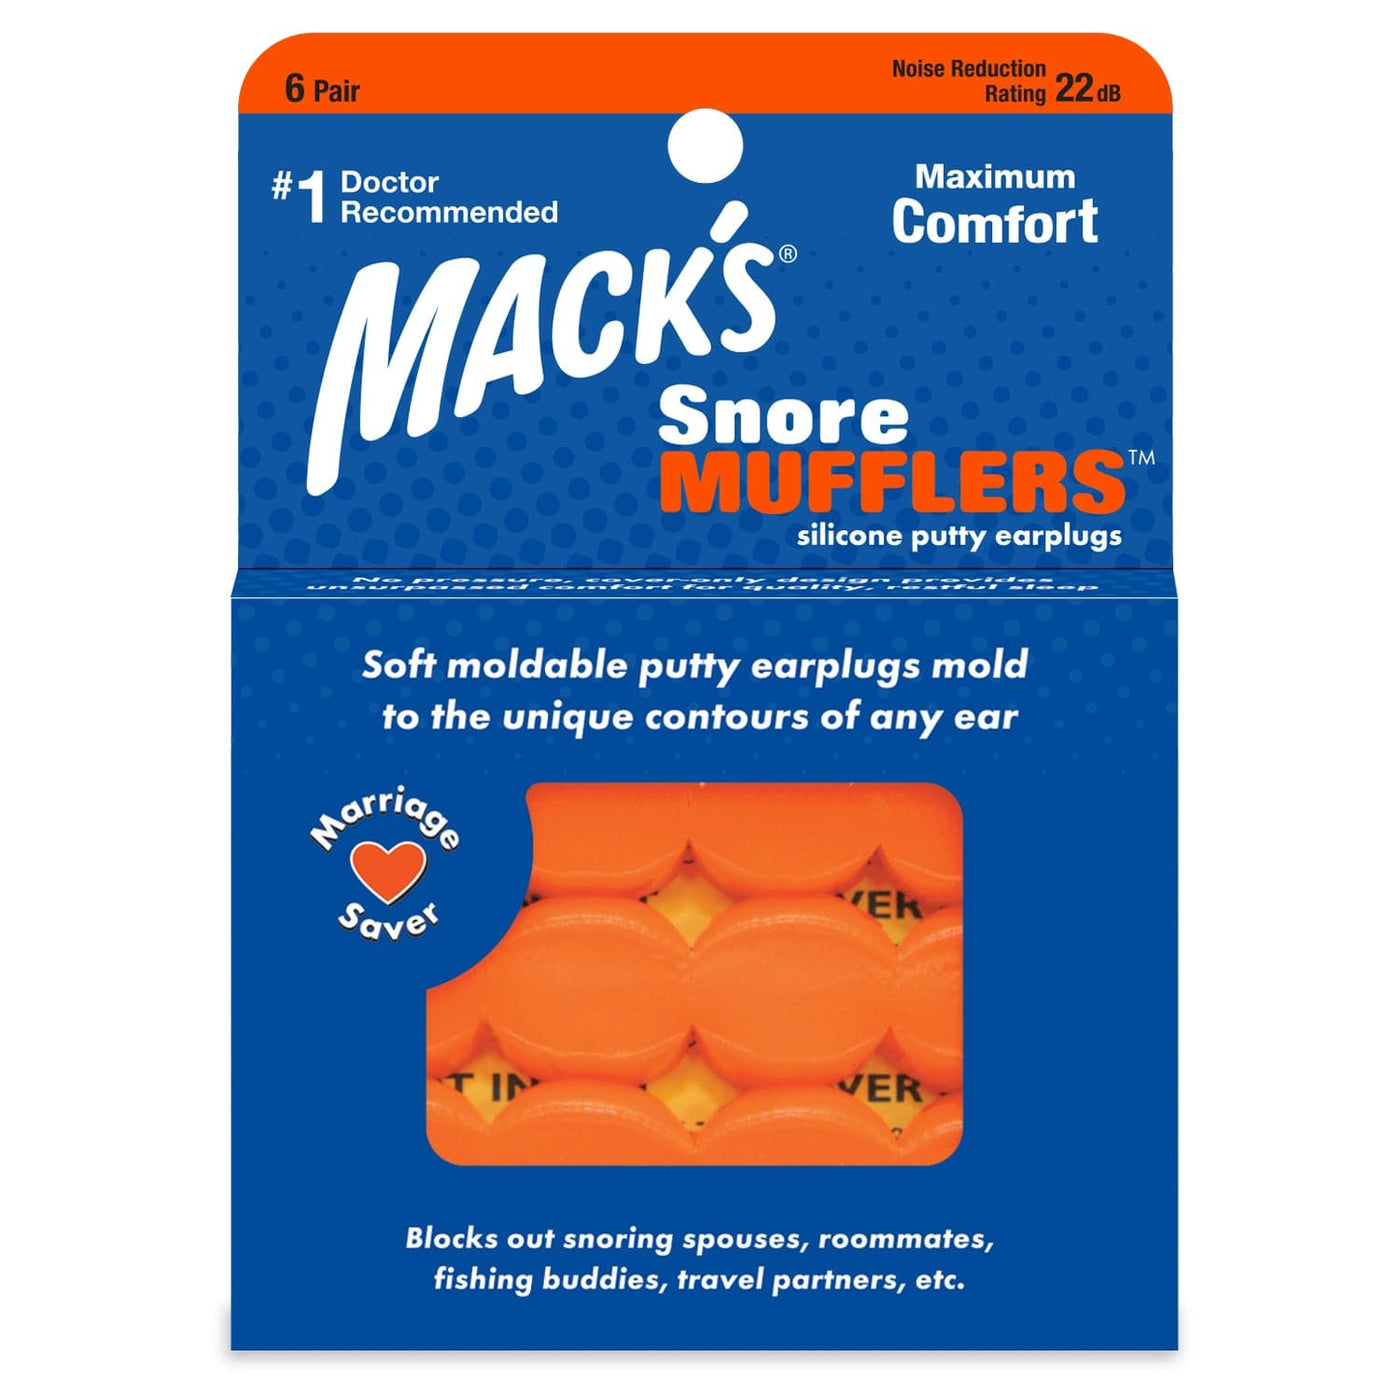 Macks Snore Mufflers™ Silicone Putty Ear Plugs (NRR 22 | 6 Pairs)